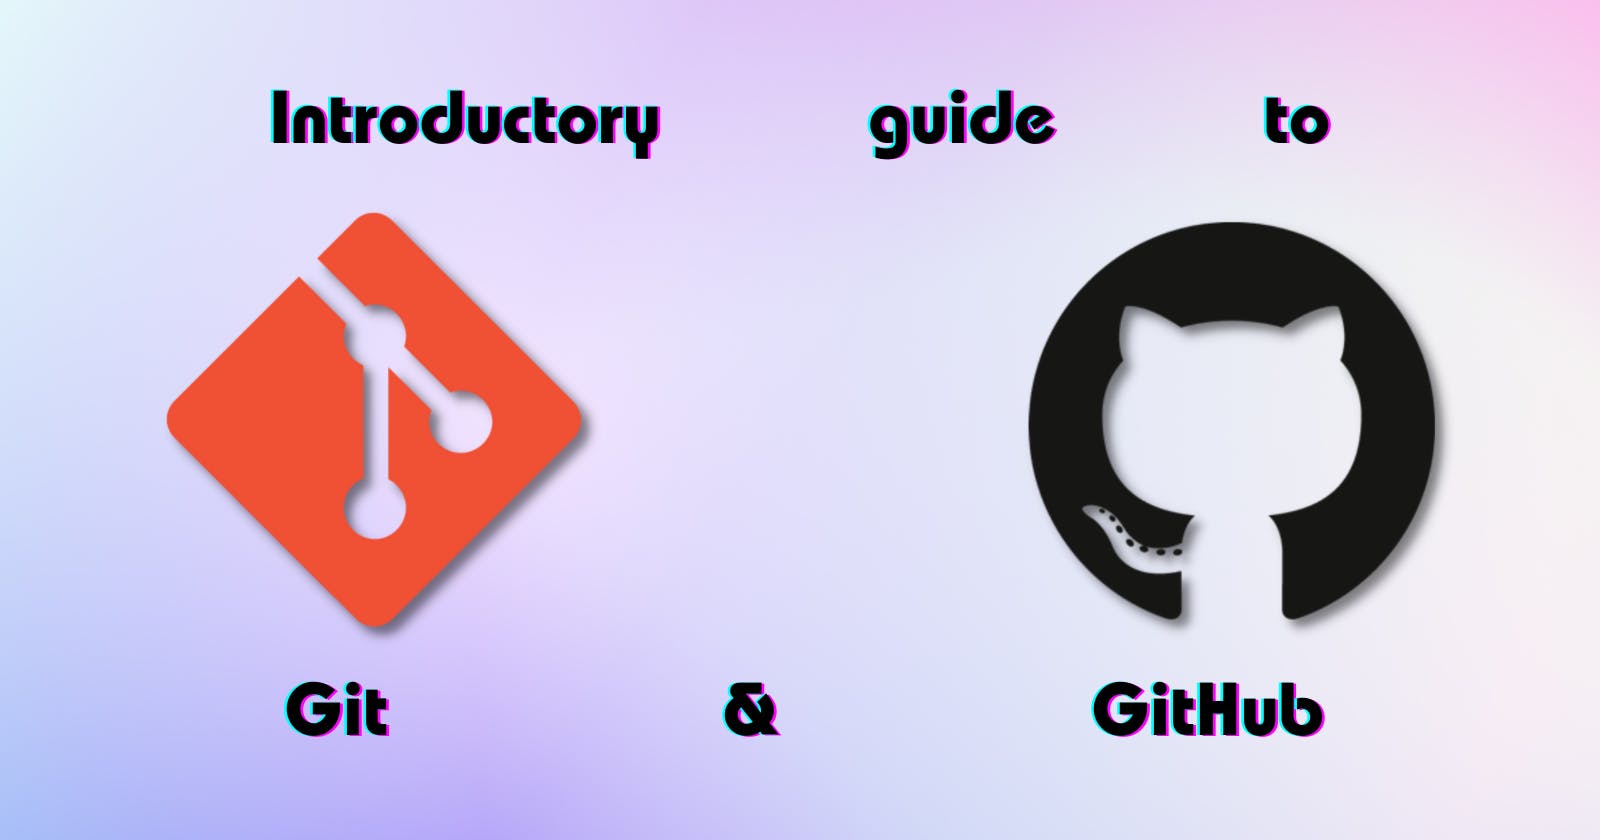 A guide to SCM: Git and GitHub